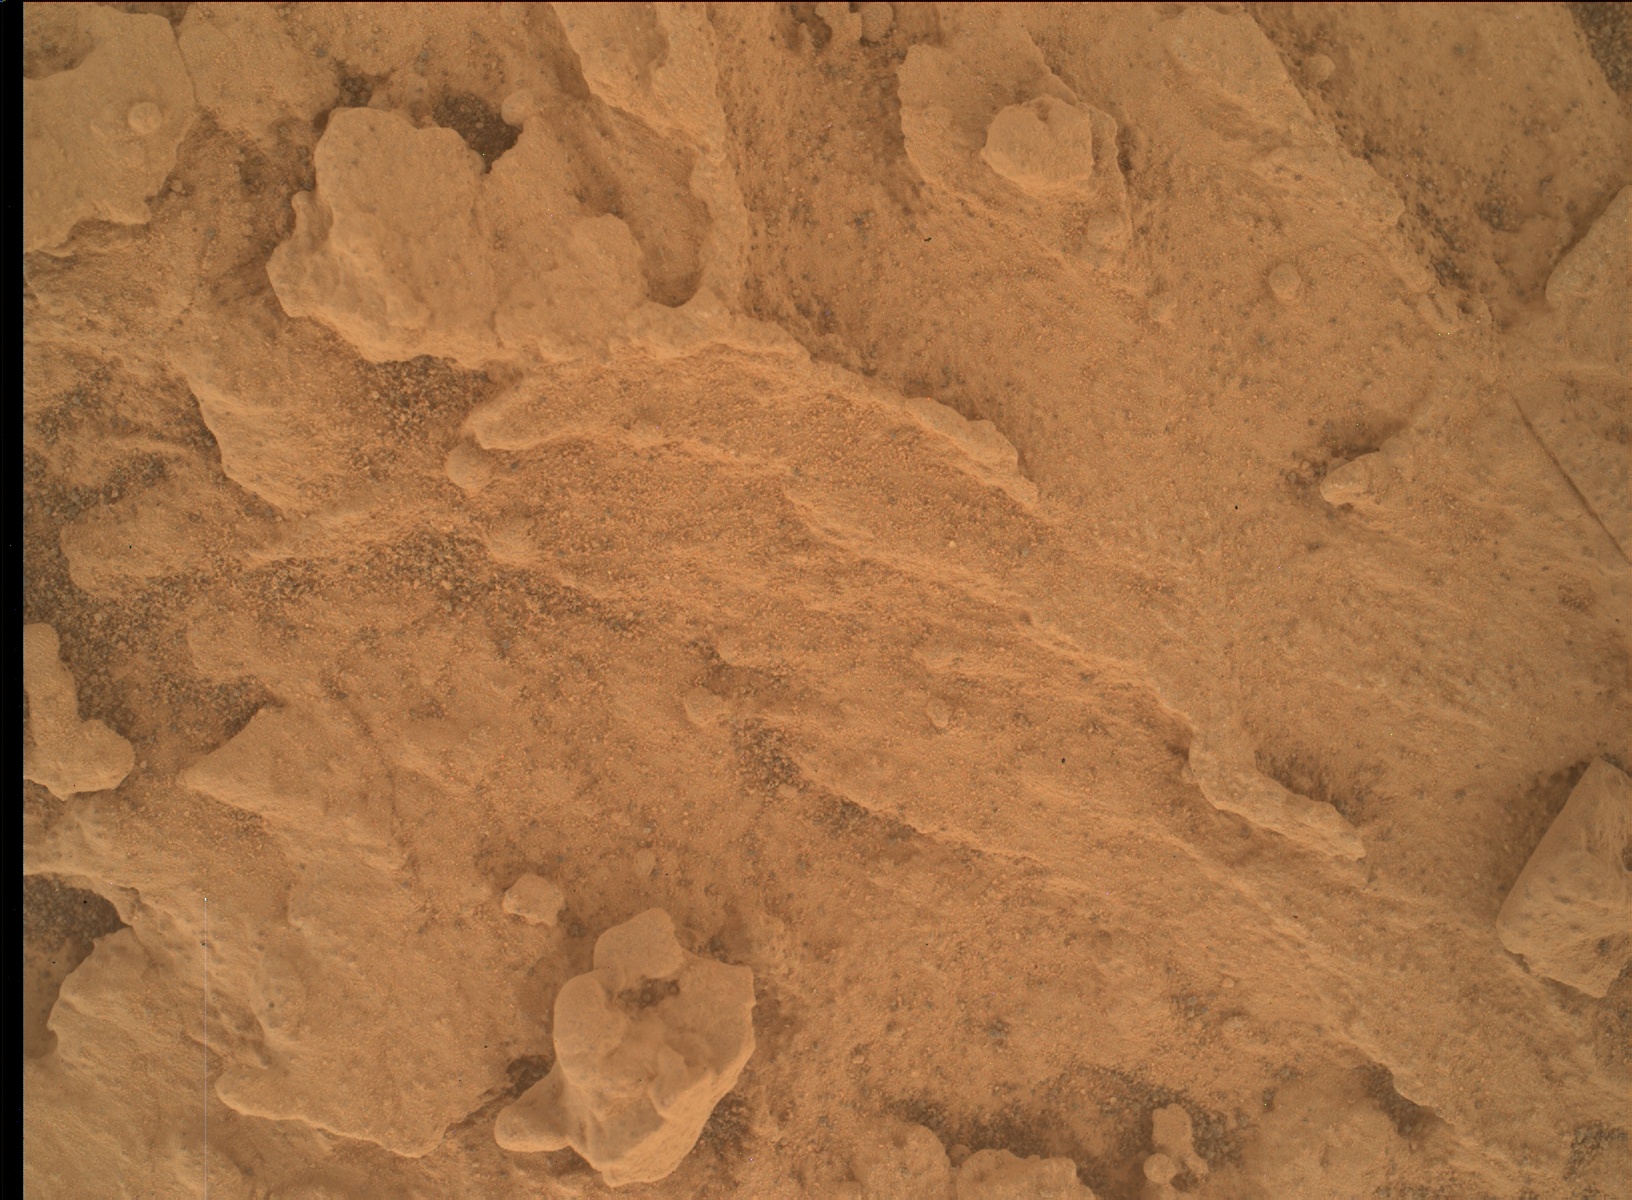 Nasa's Mars rover Curiosity acquired this image using its Mars Hand Lens Imager (MAHLI) on Sol 3347